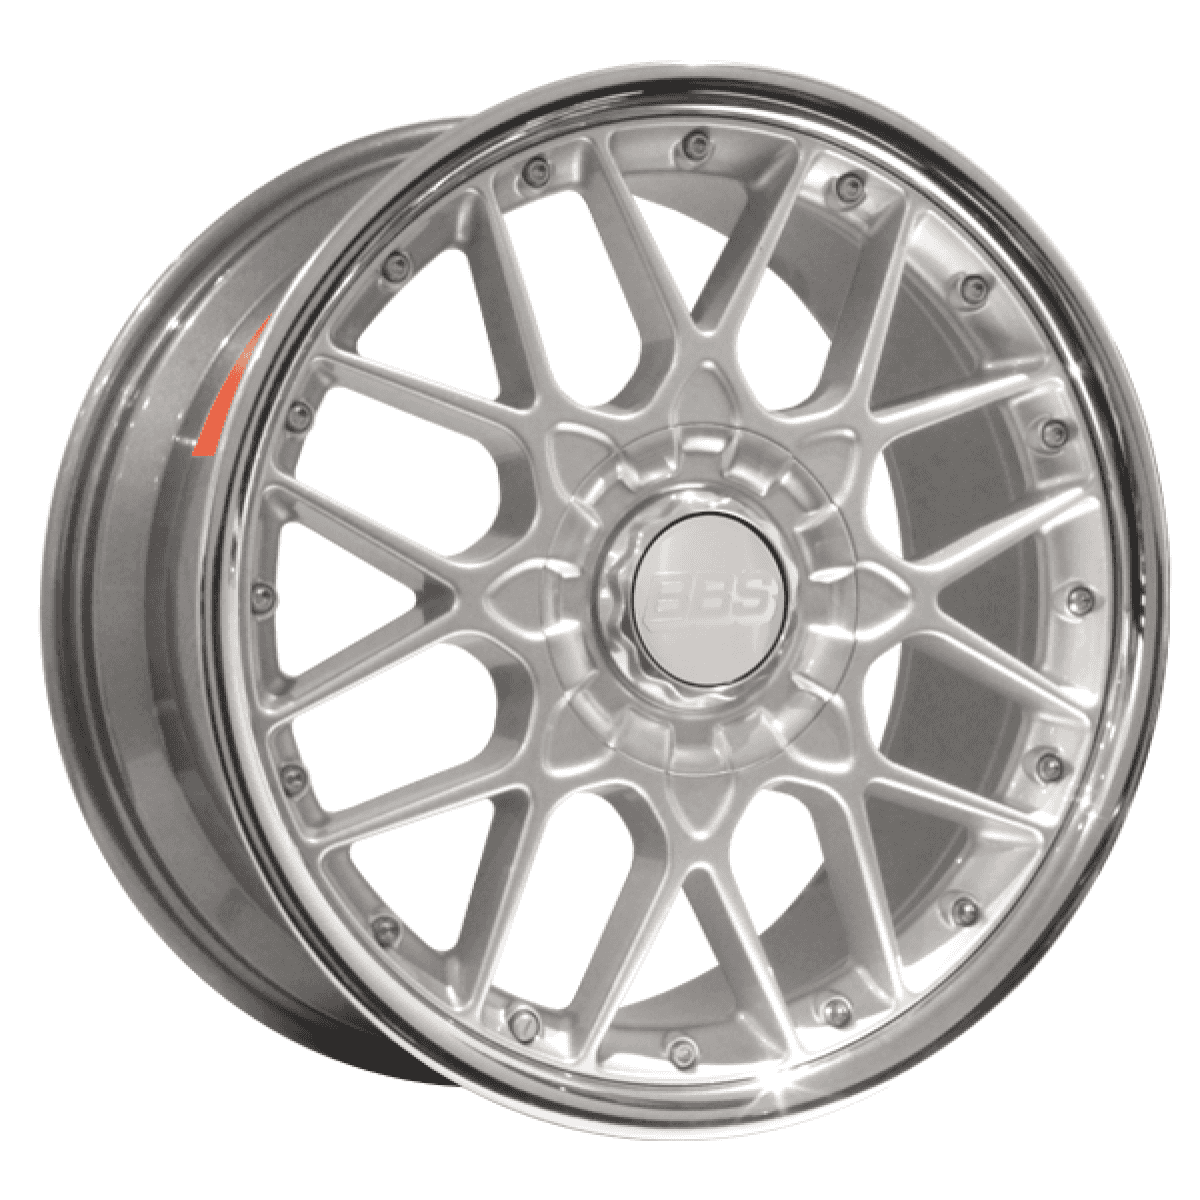 Buy BBS RSII (Forged Split Rim) RS2 in Decor Silver with Stainless